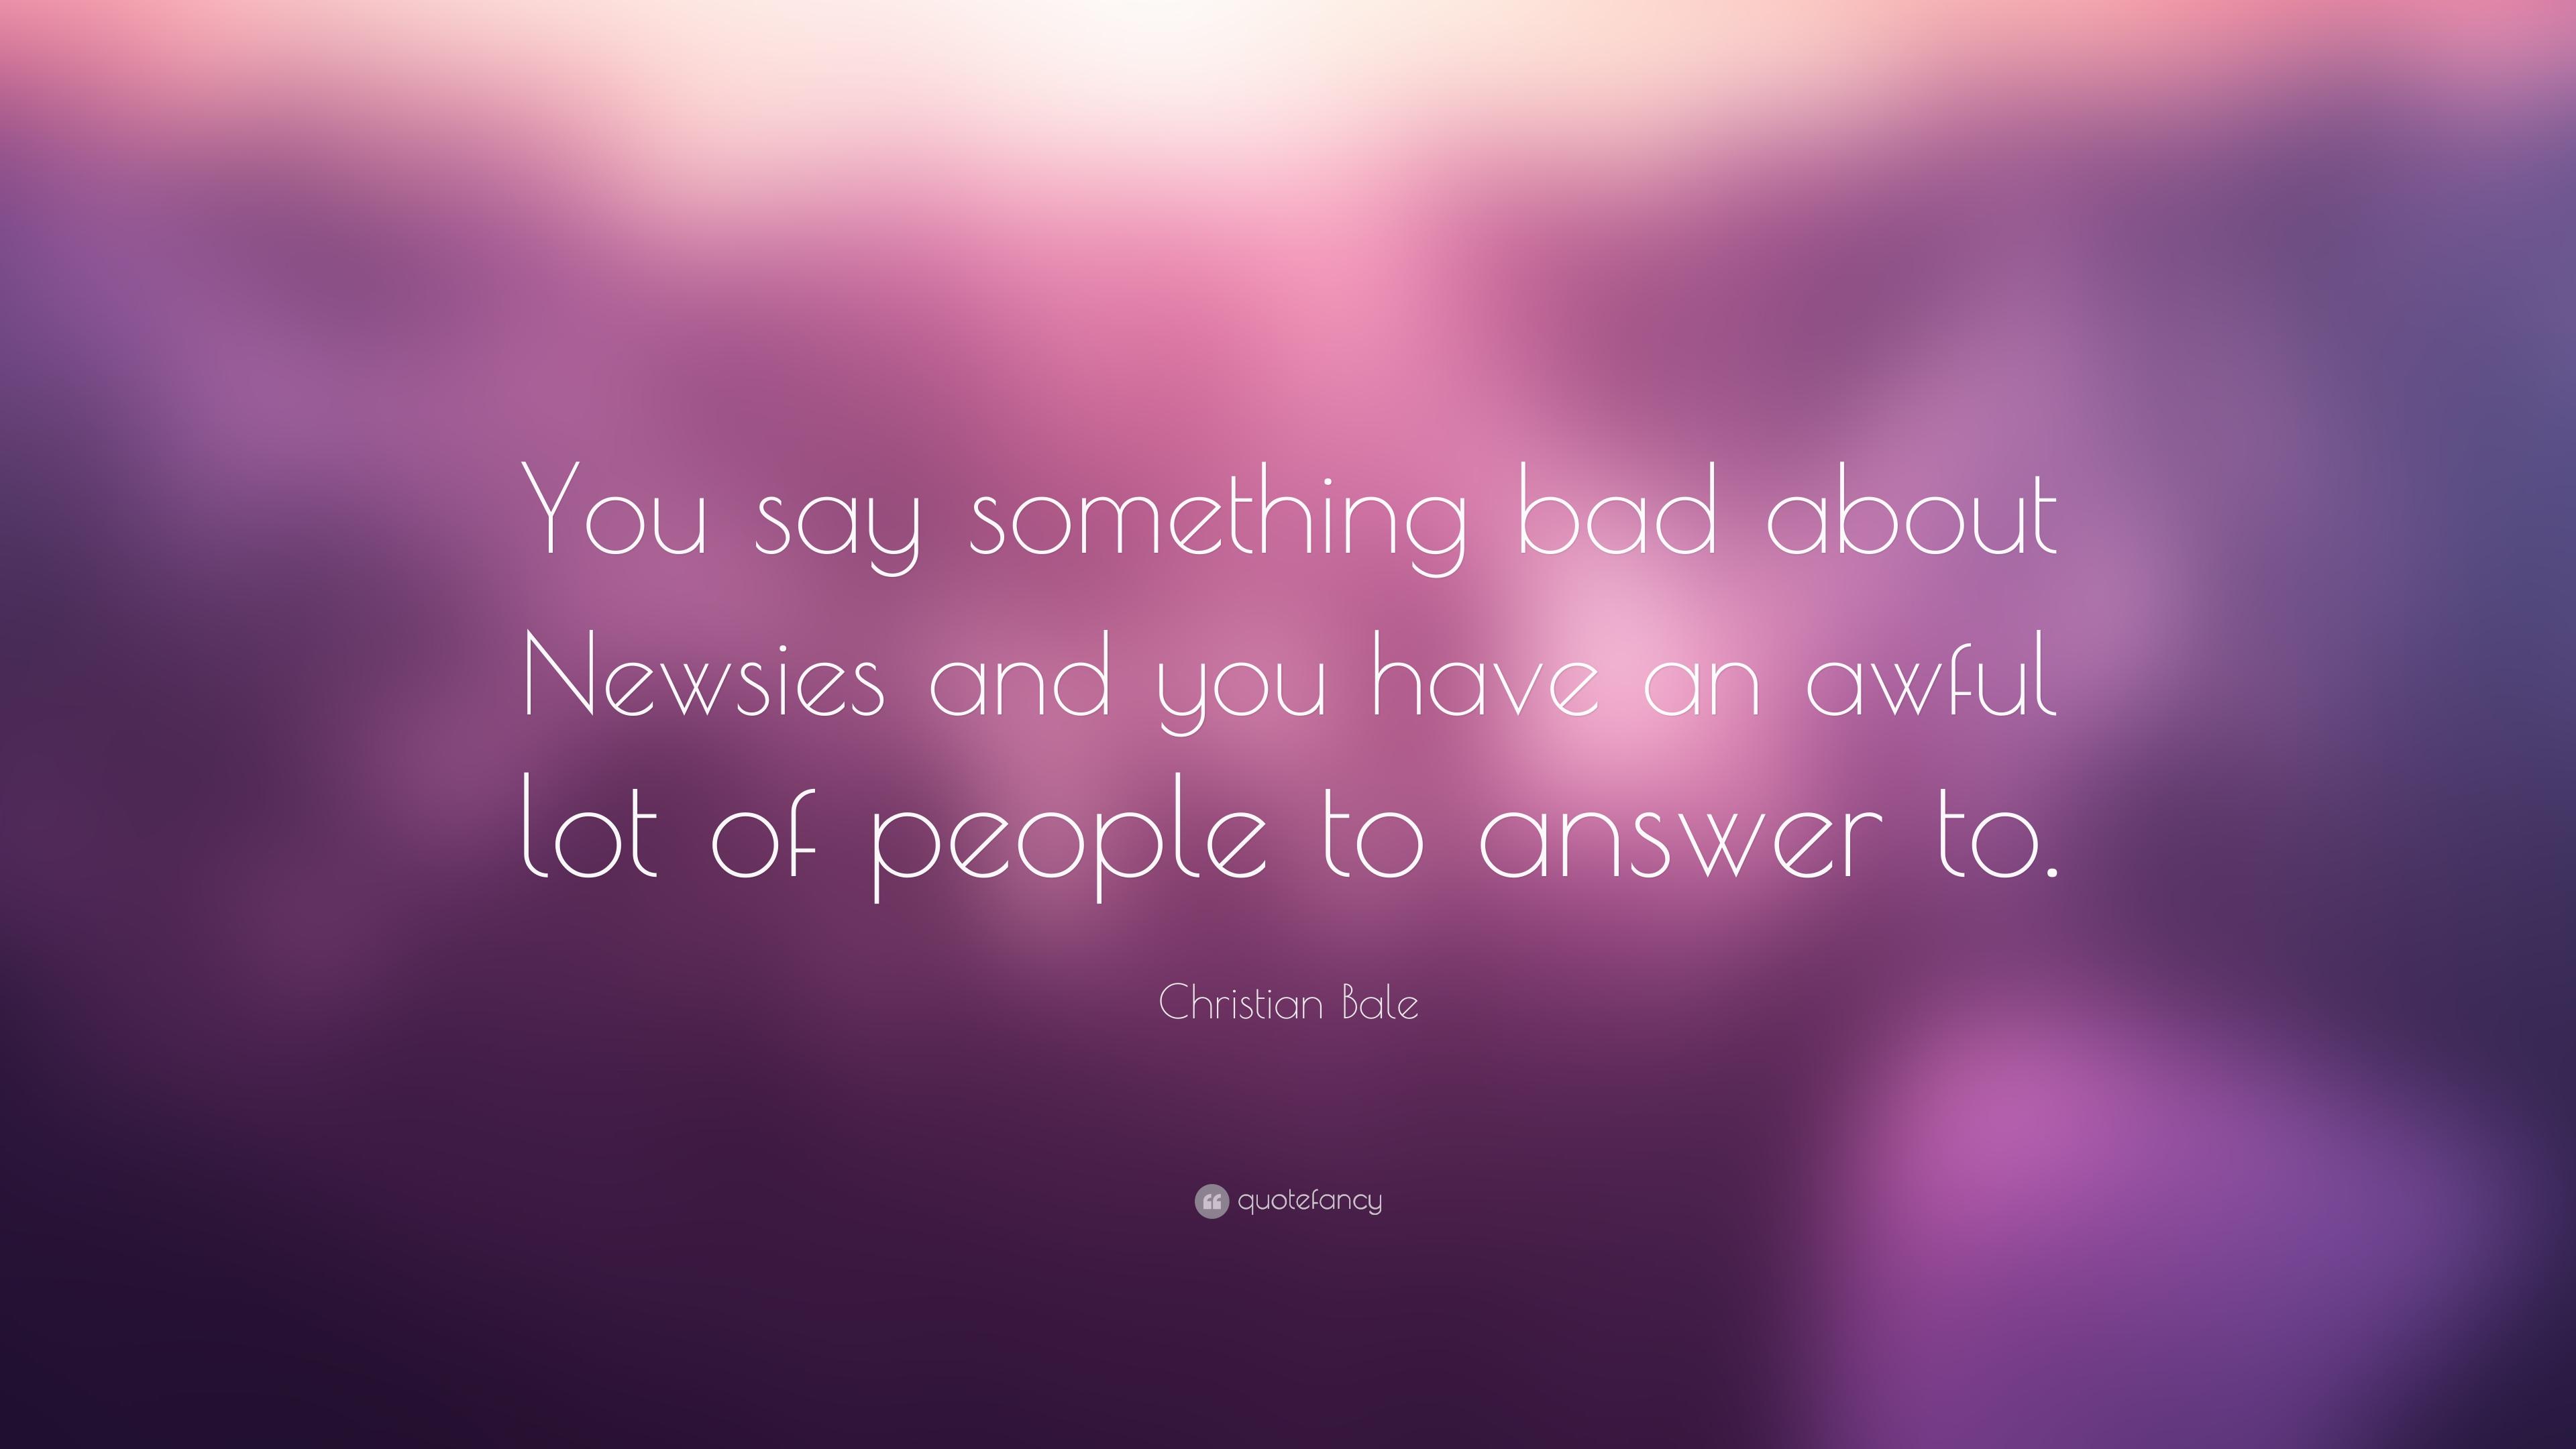 Christian Bale Quote: “You say something bad about Newsies and you